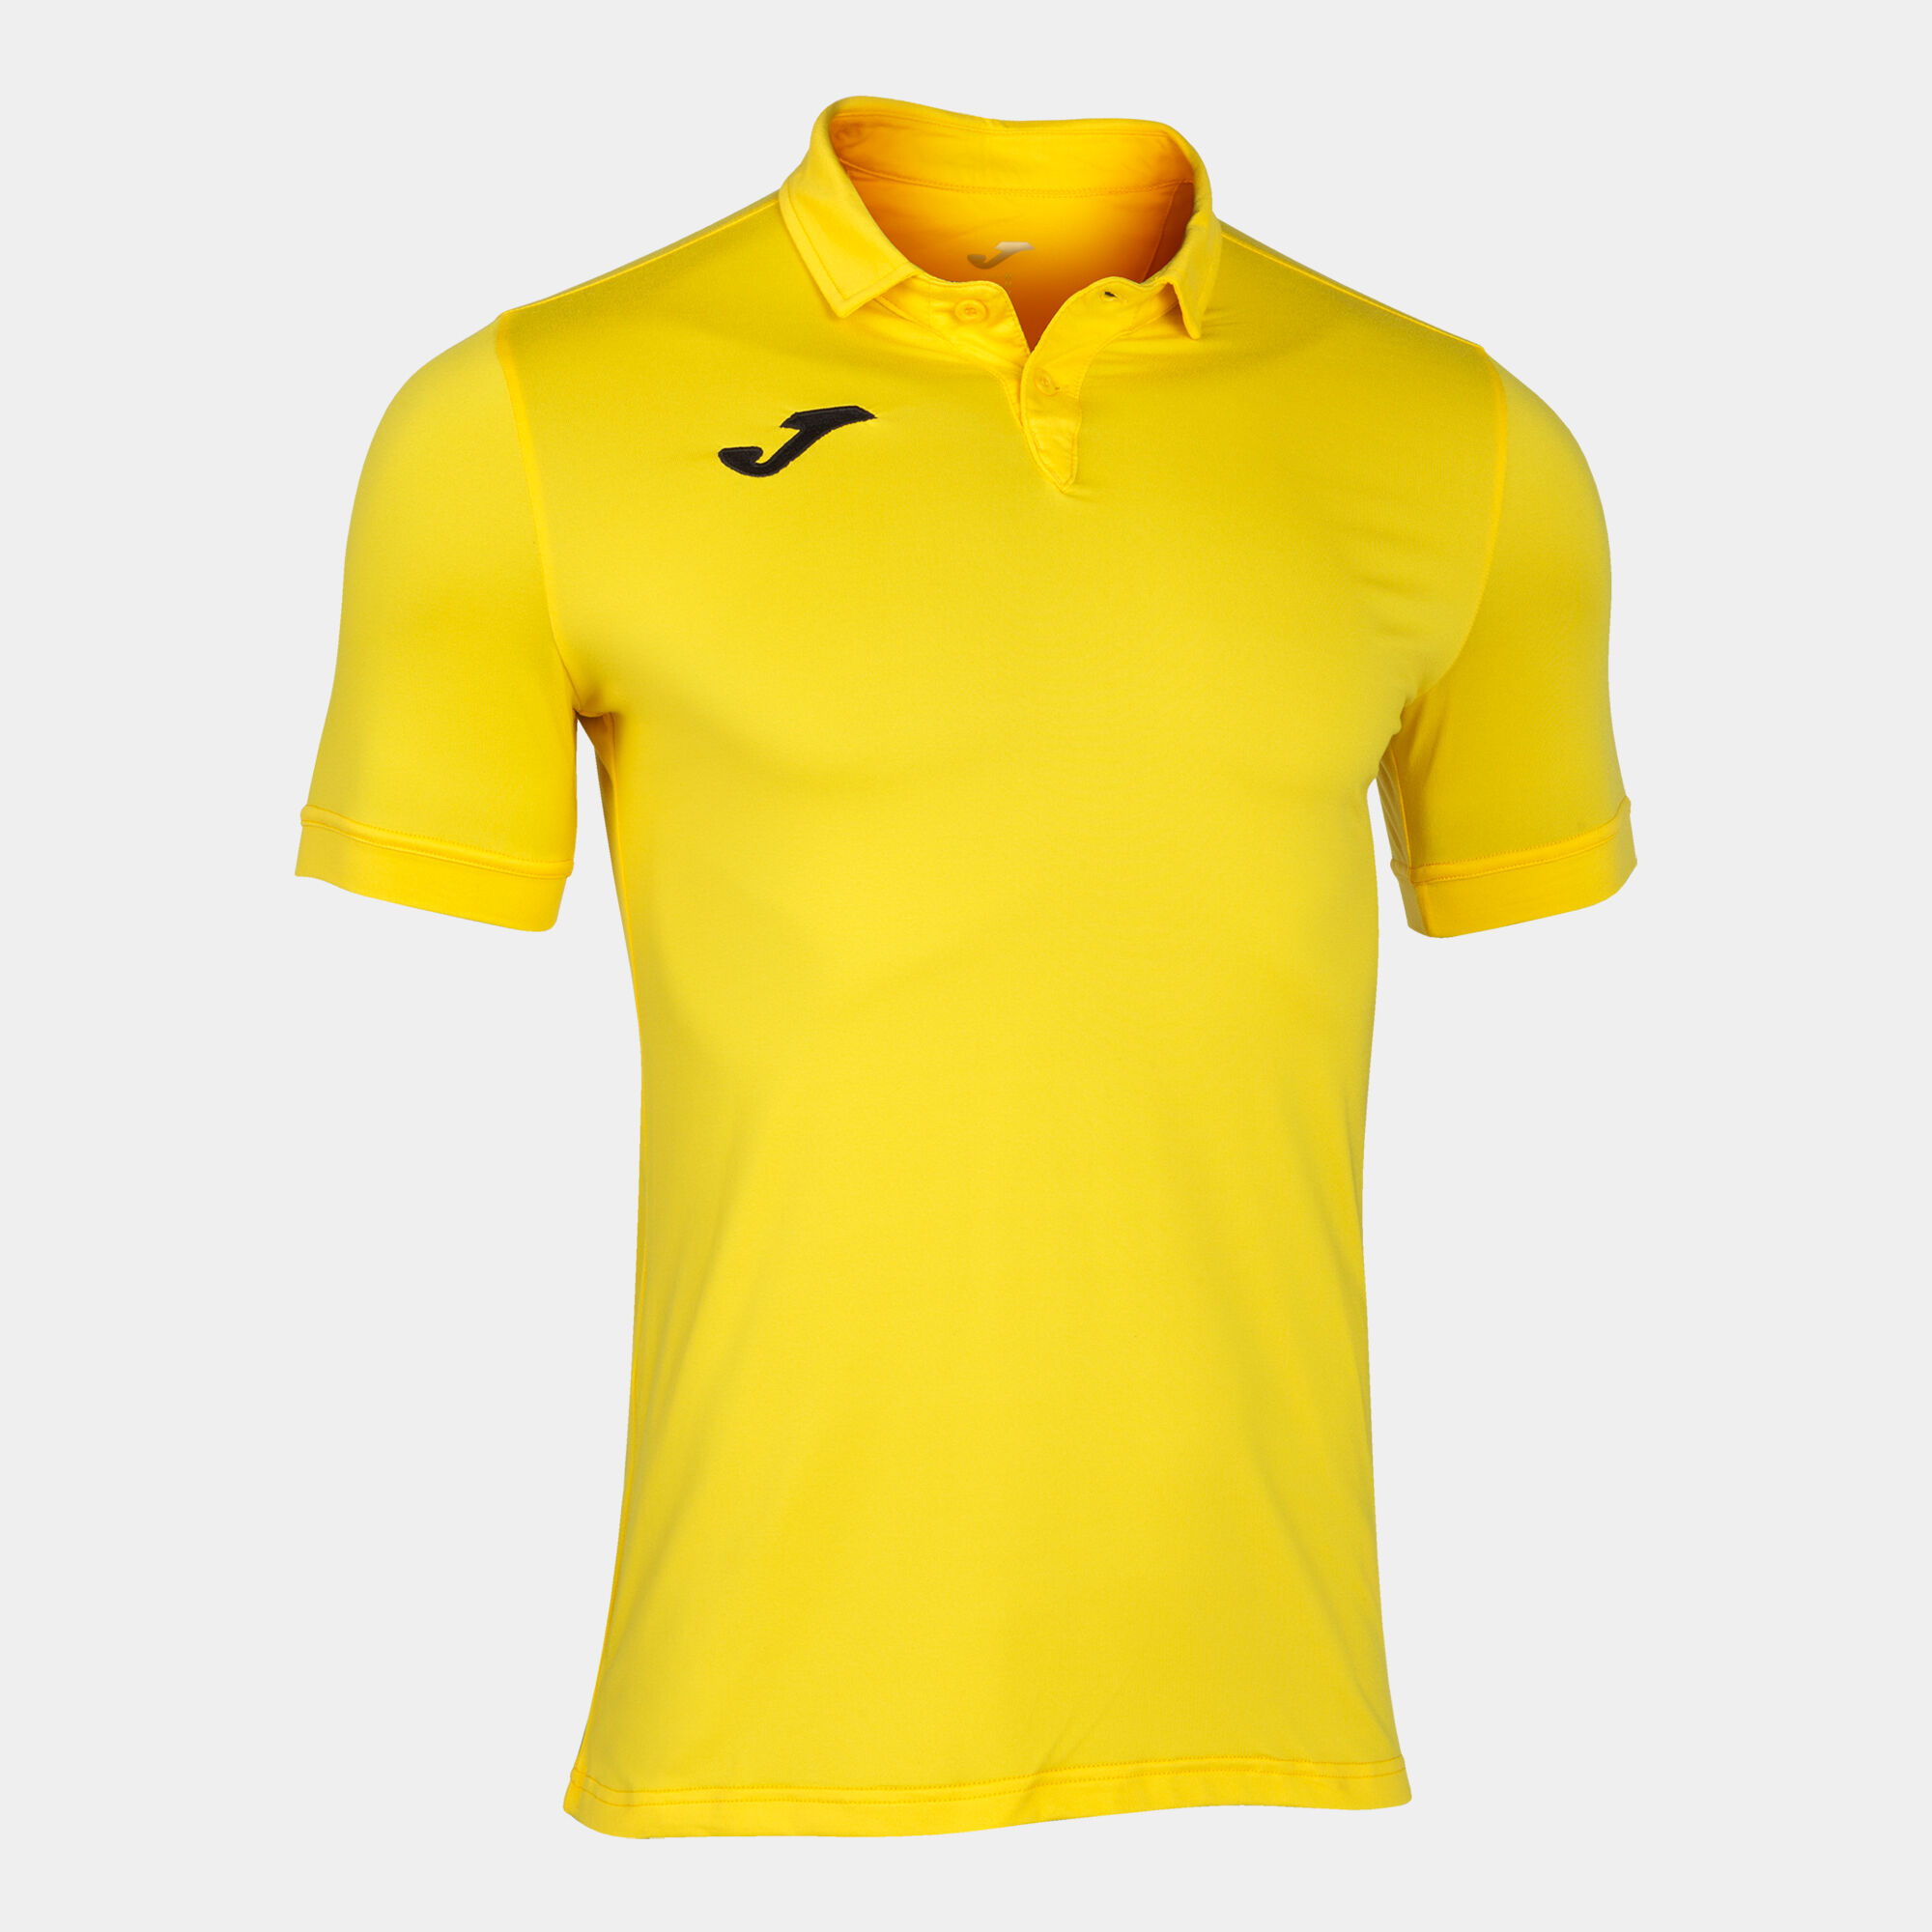 MAILLOT MANCHES COURTES HOMME GOLD II JAUNE